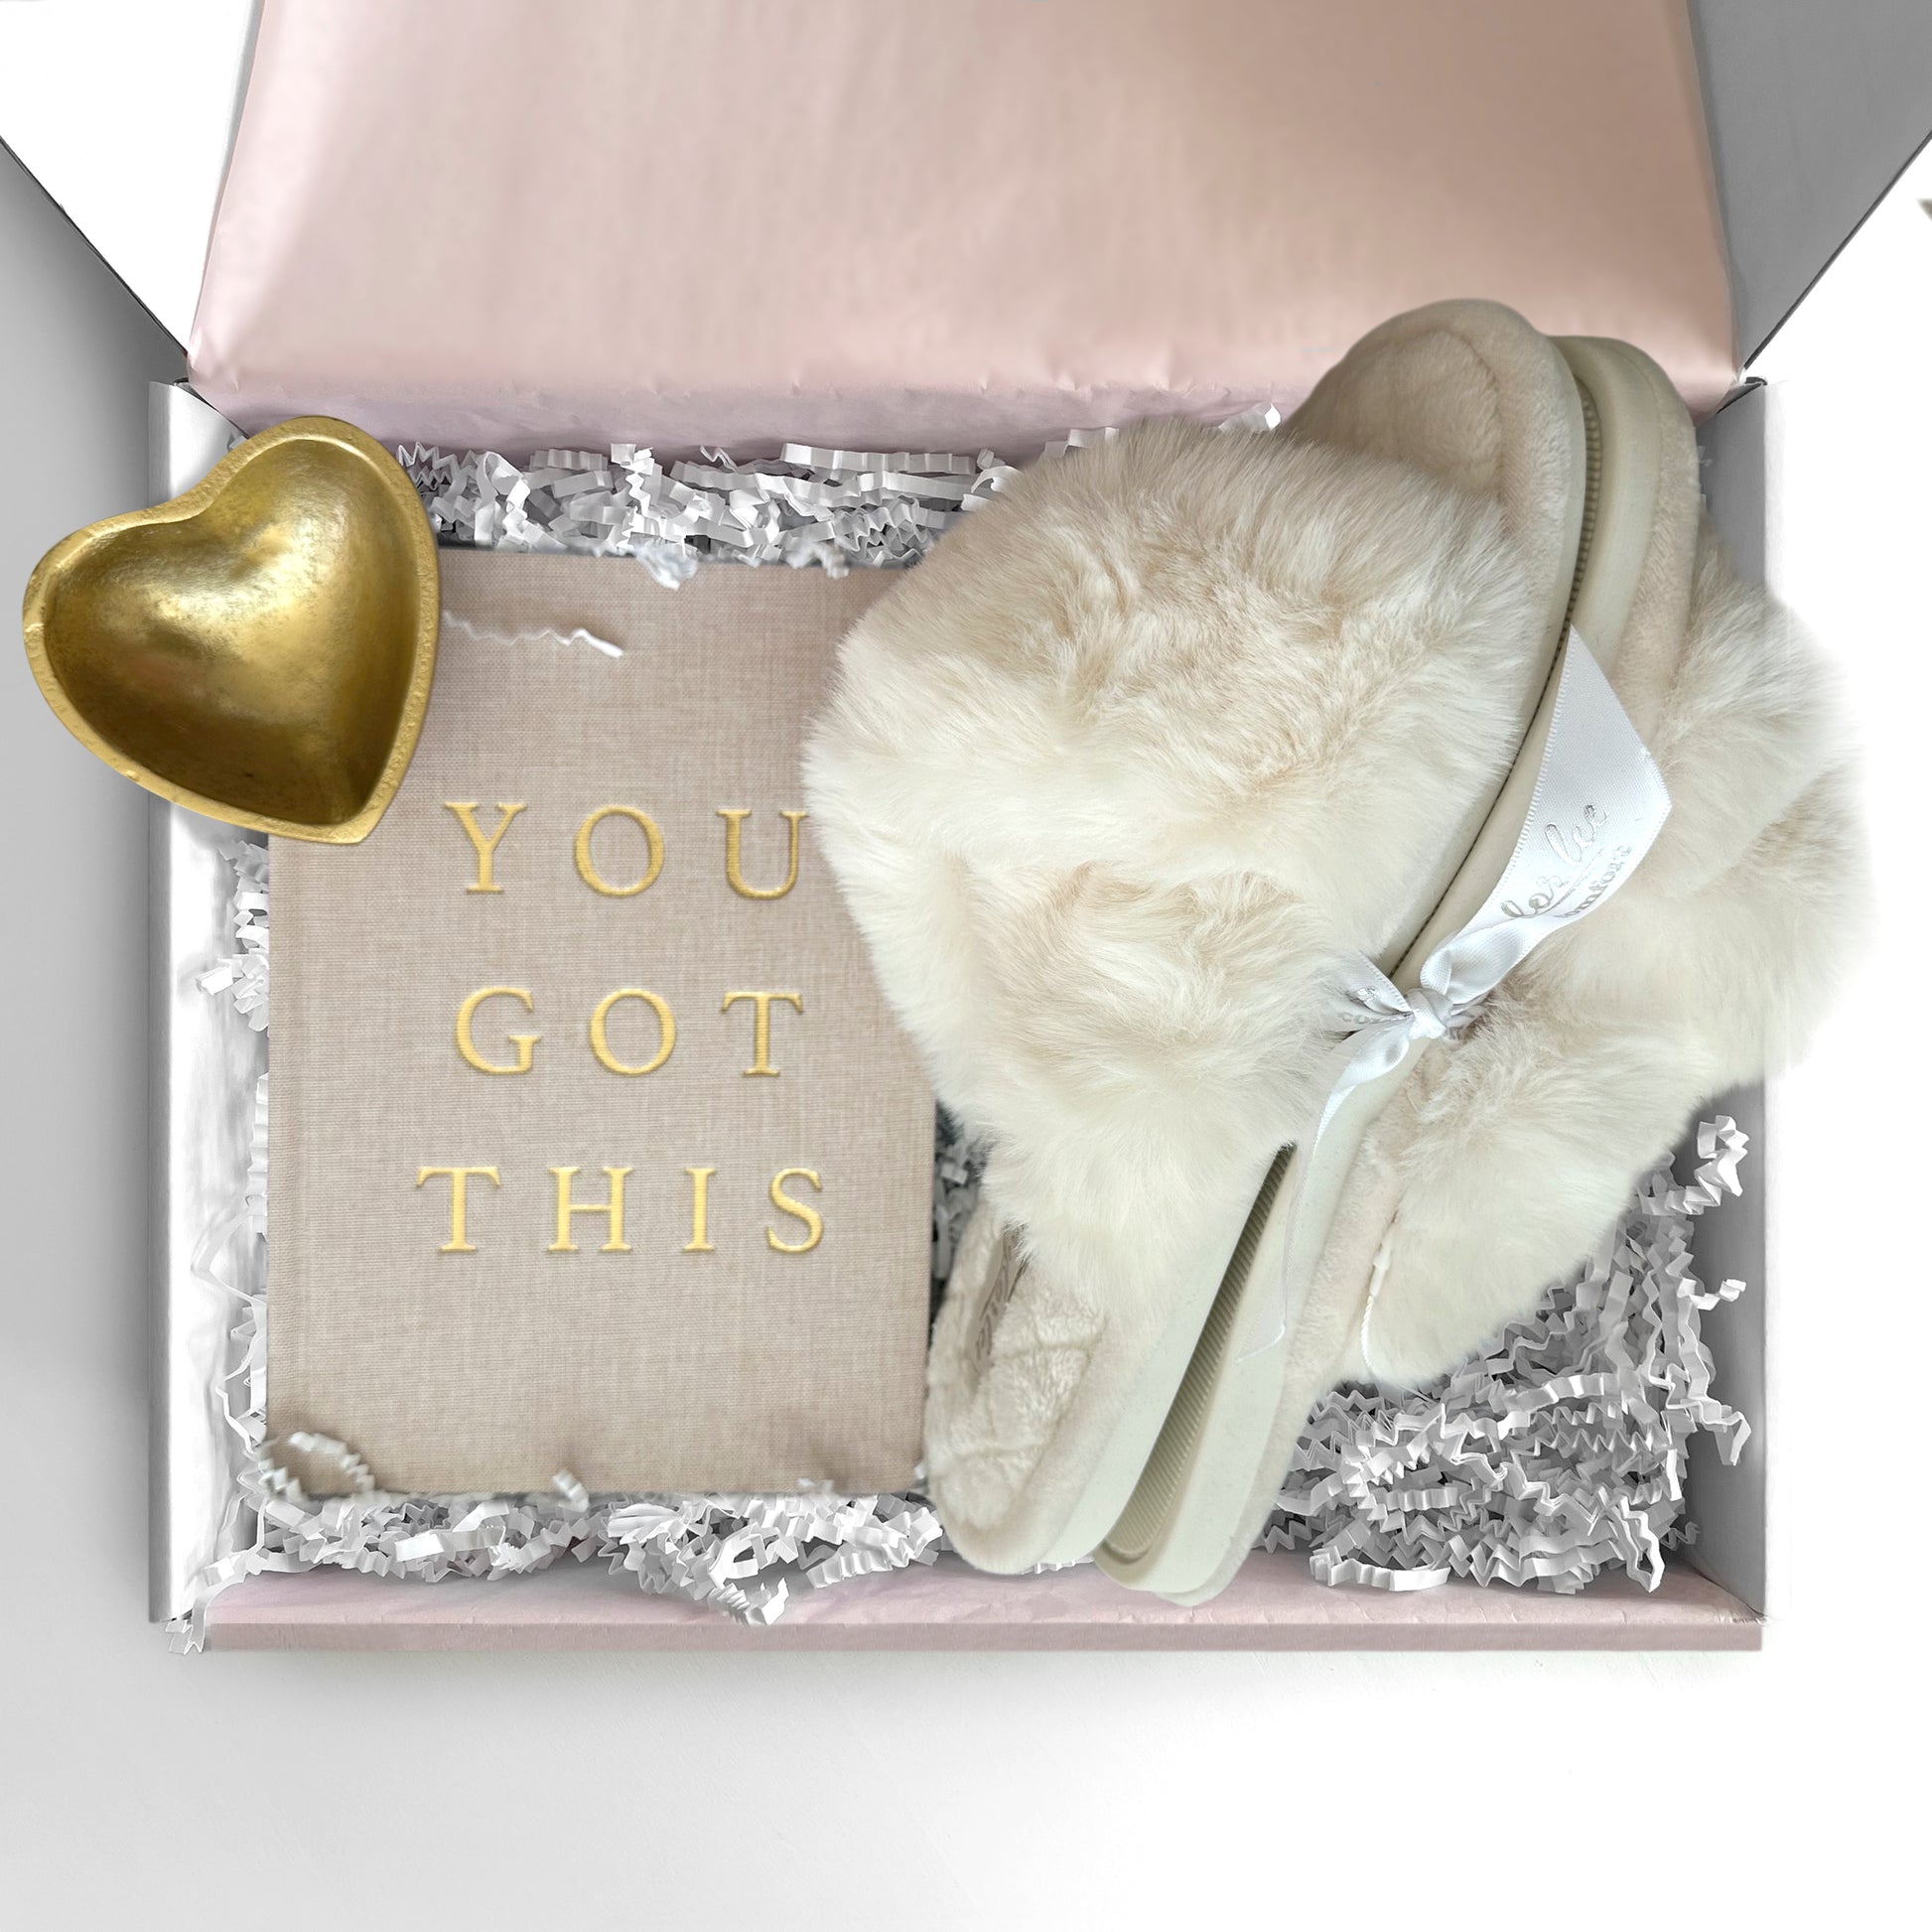 you got this gift box with gold heart and journal with comfortable slippers